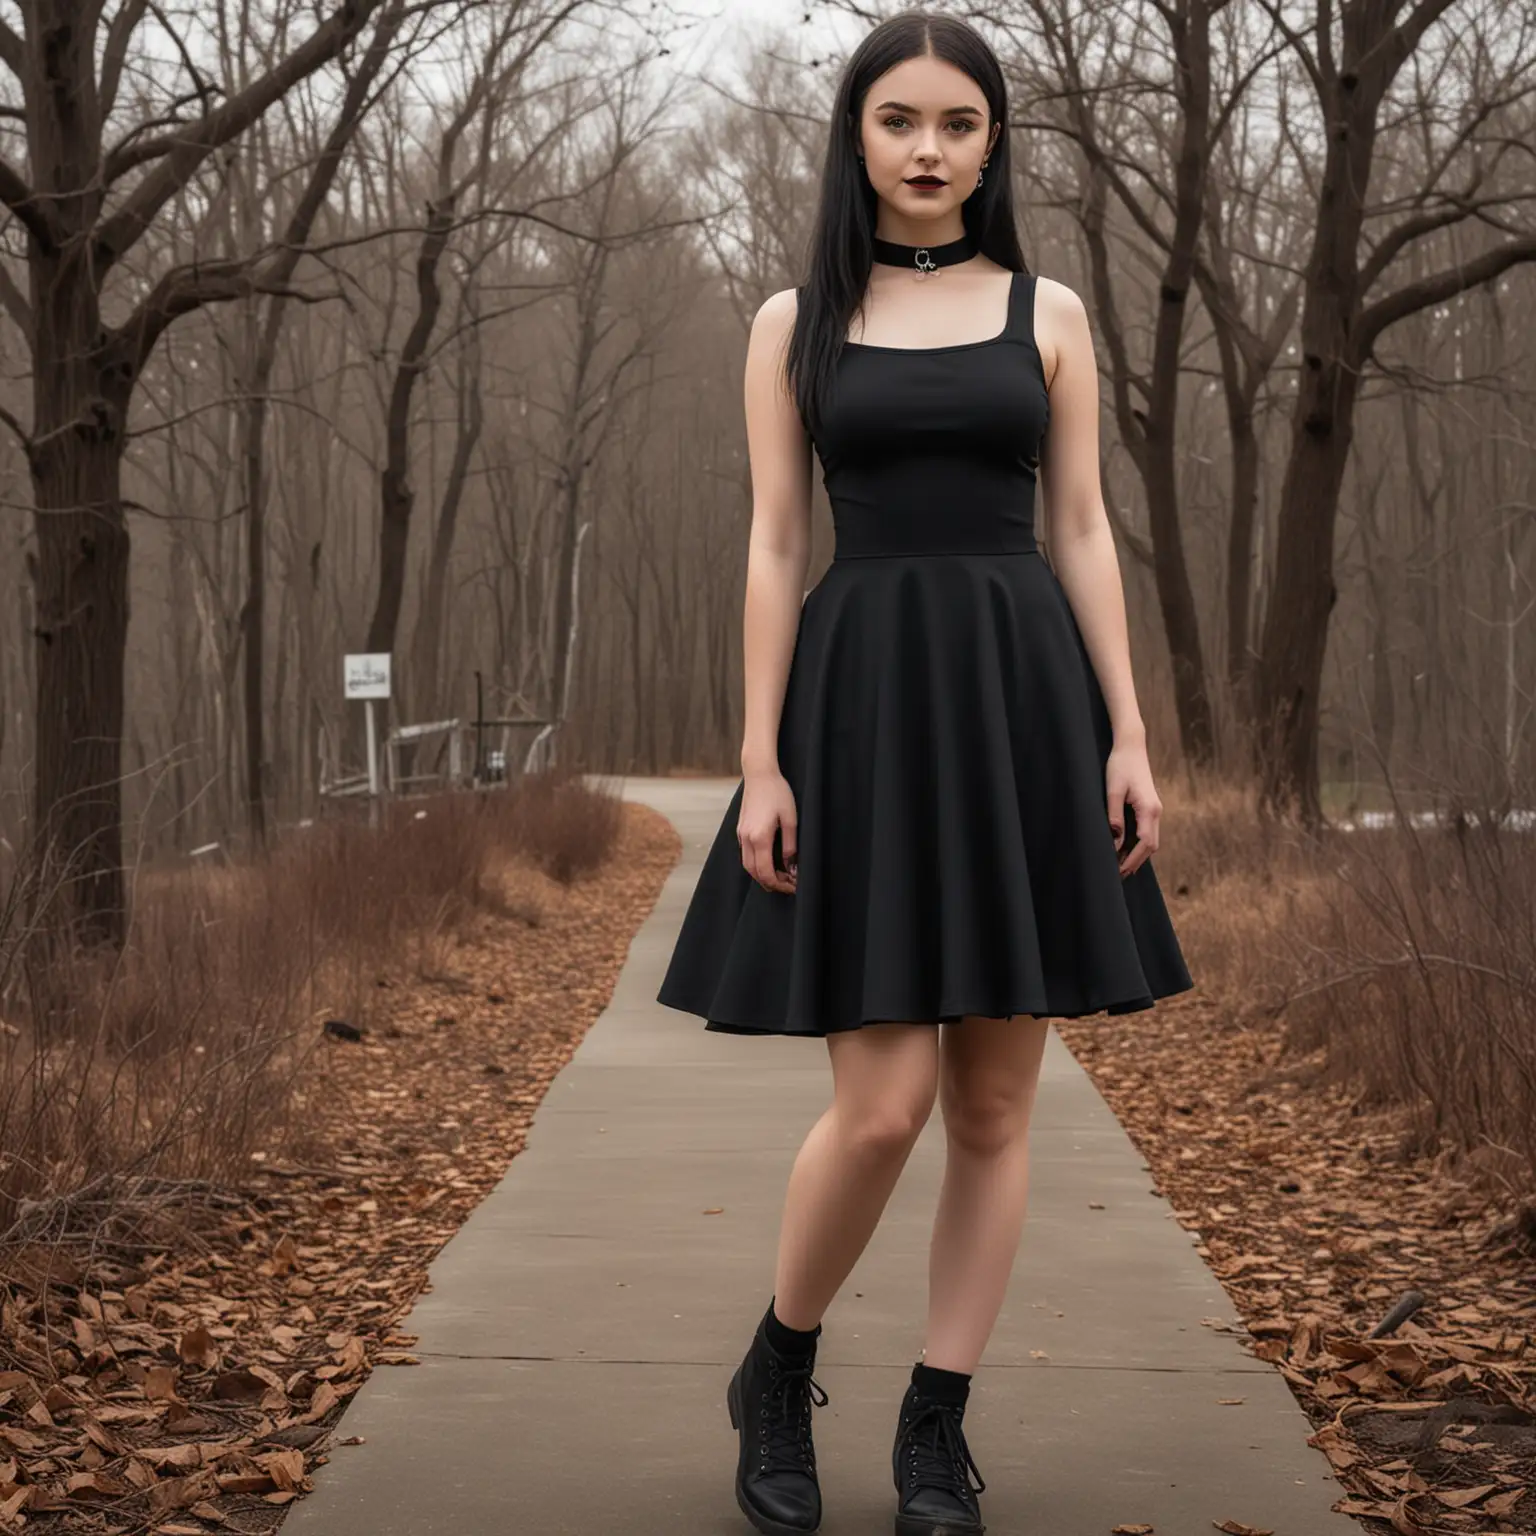 Gothic Skater Dress Wednesday Addams Inspired Fashion at Nevermore Academy